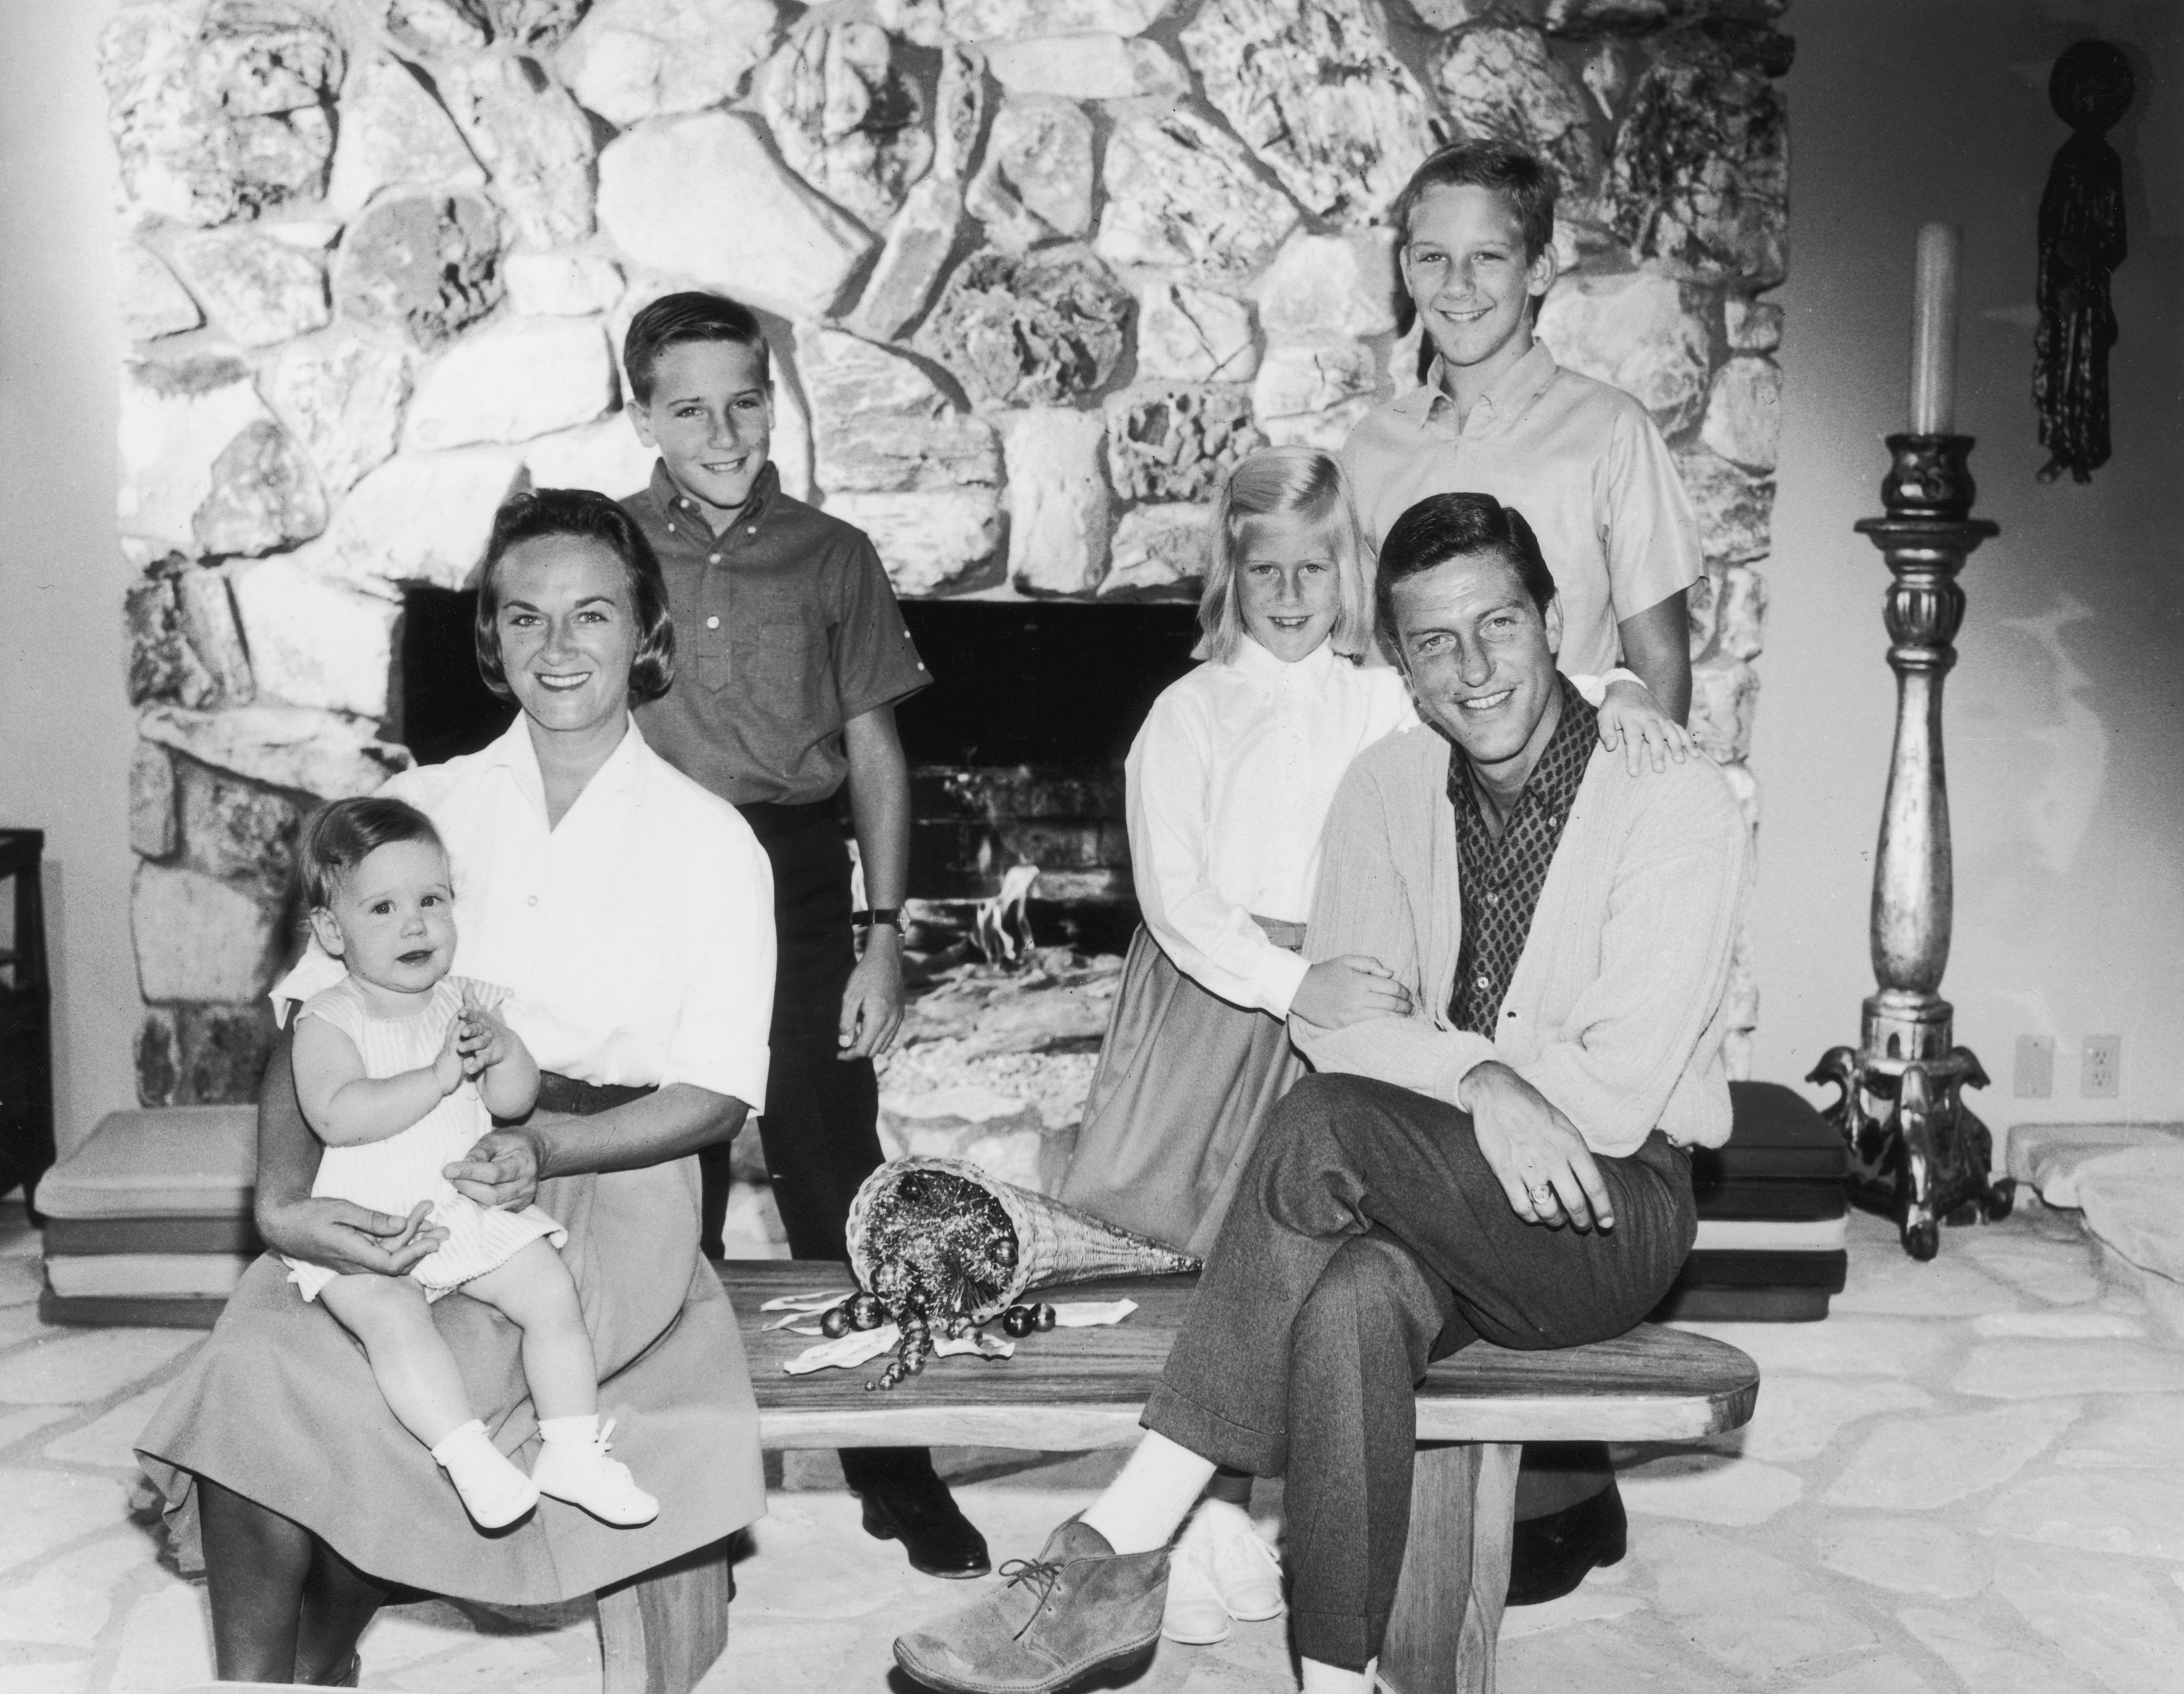 Dick Van Dyke, Margie Willet, and their four children: Barry, Carrie, Chris, and Stacy in circa 1965. | Source: Hulton Archive/Getty Images